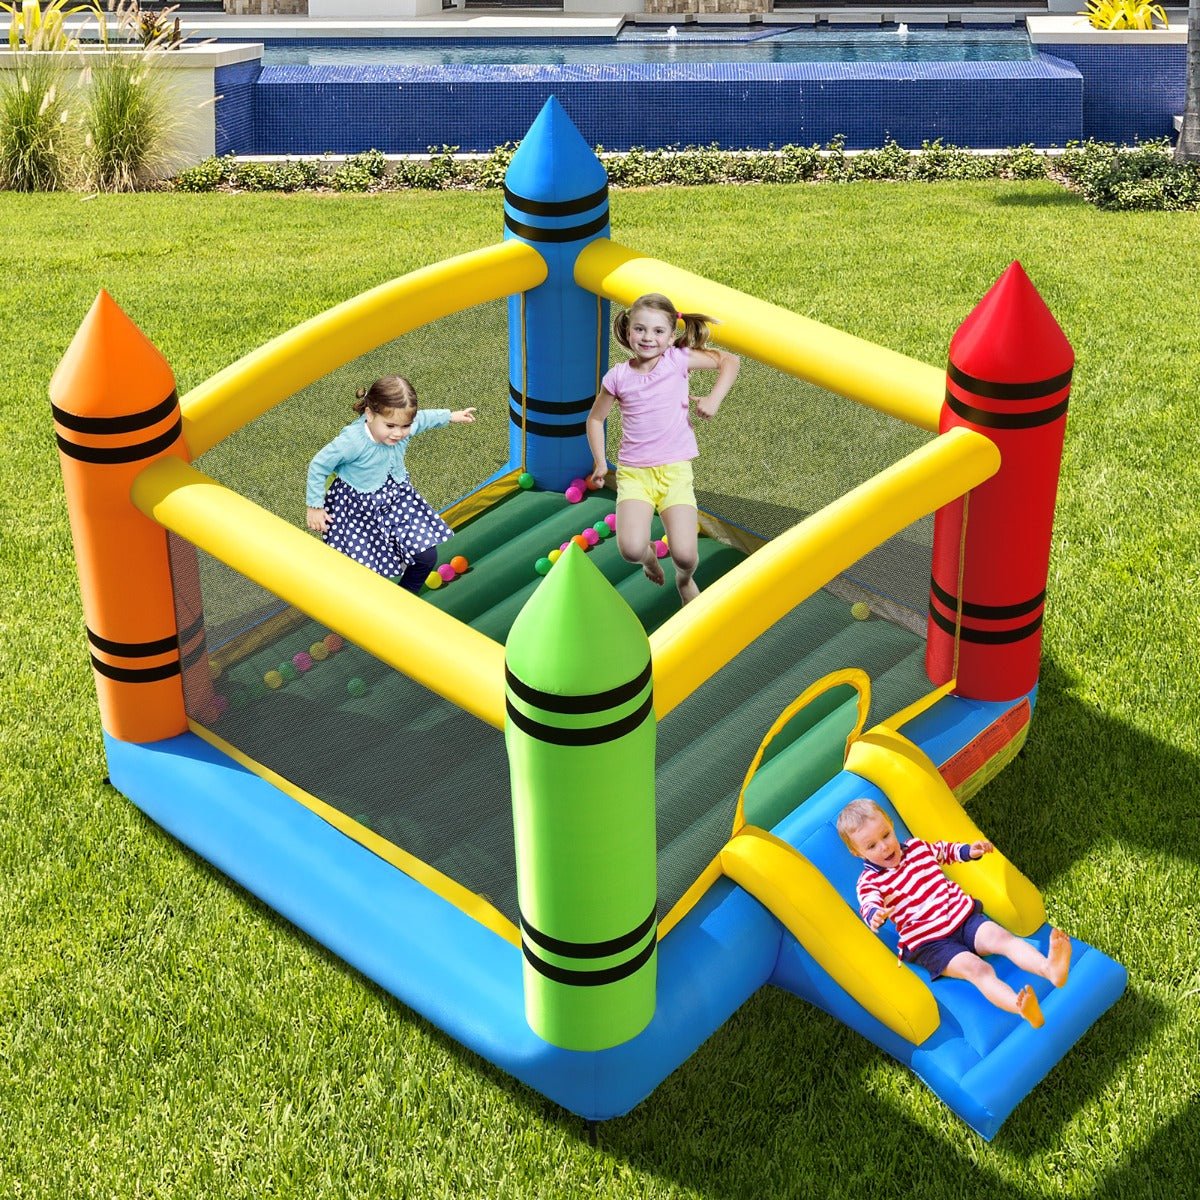 Children's Bounce House with Fun Slide - Outdoor Playtime Excitement